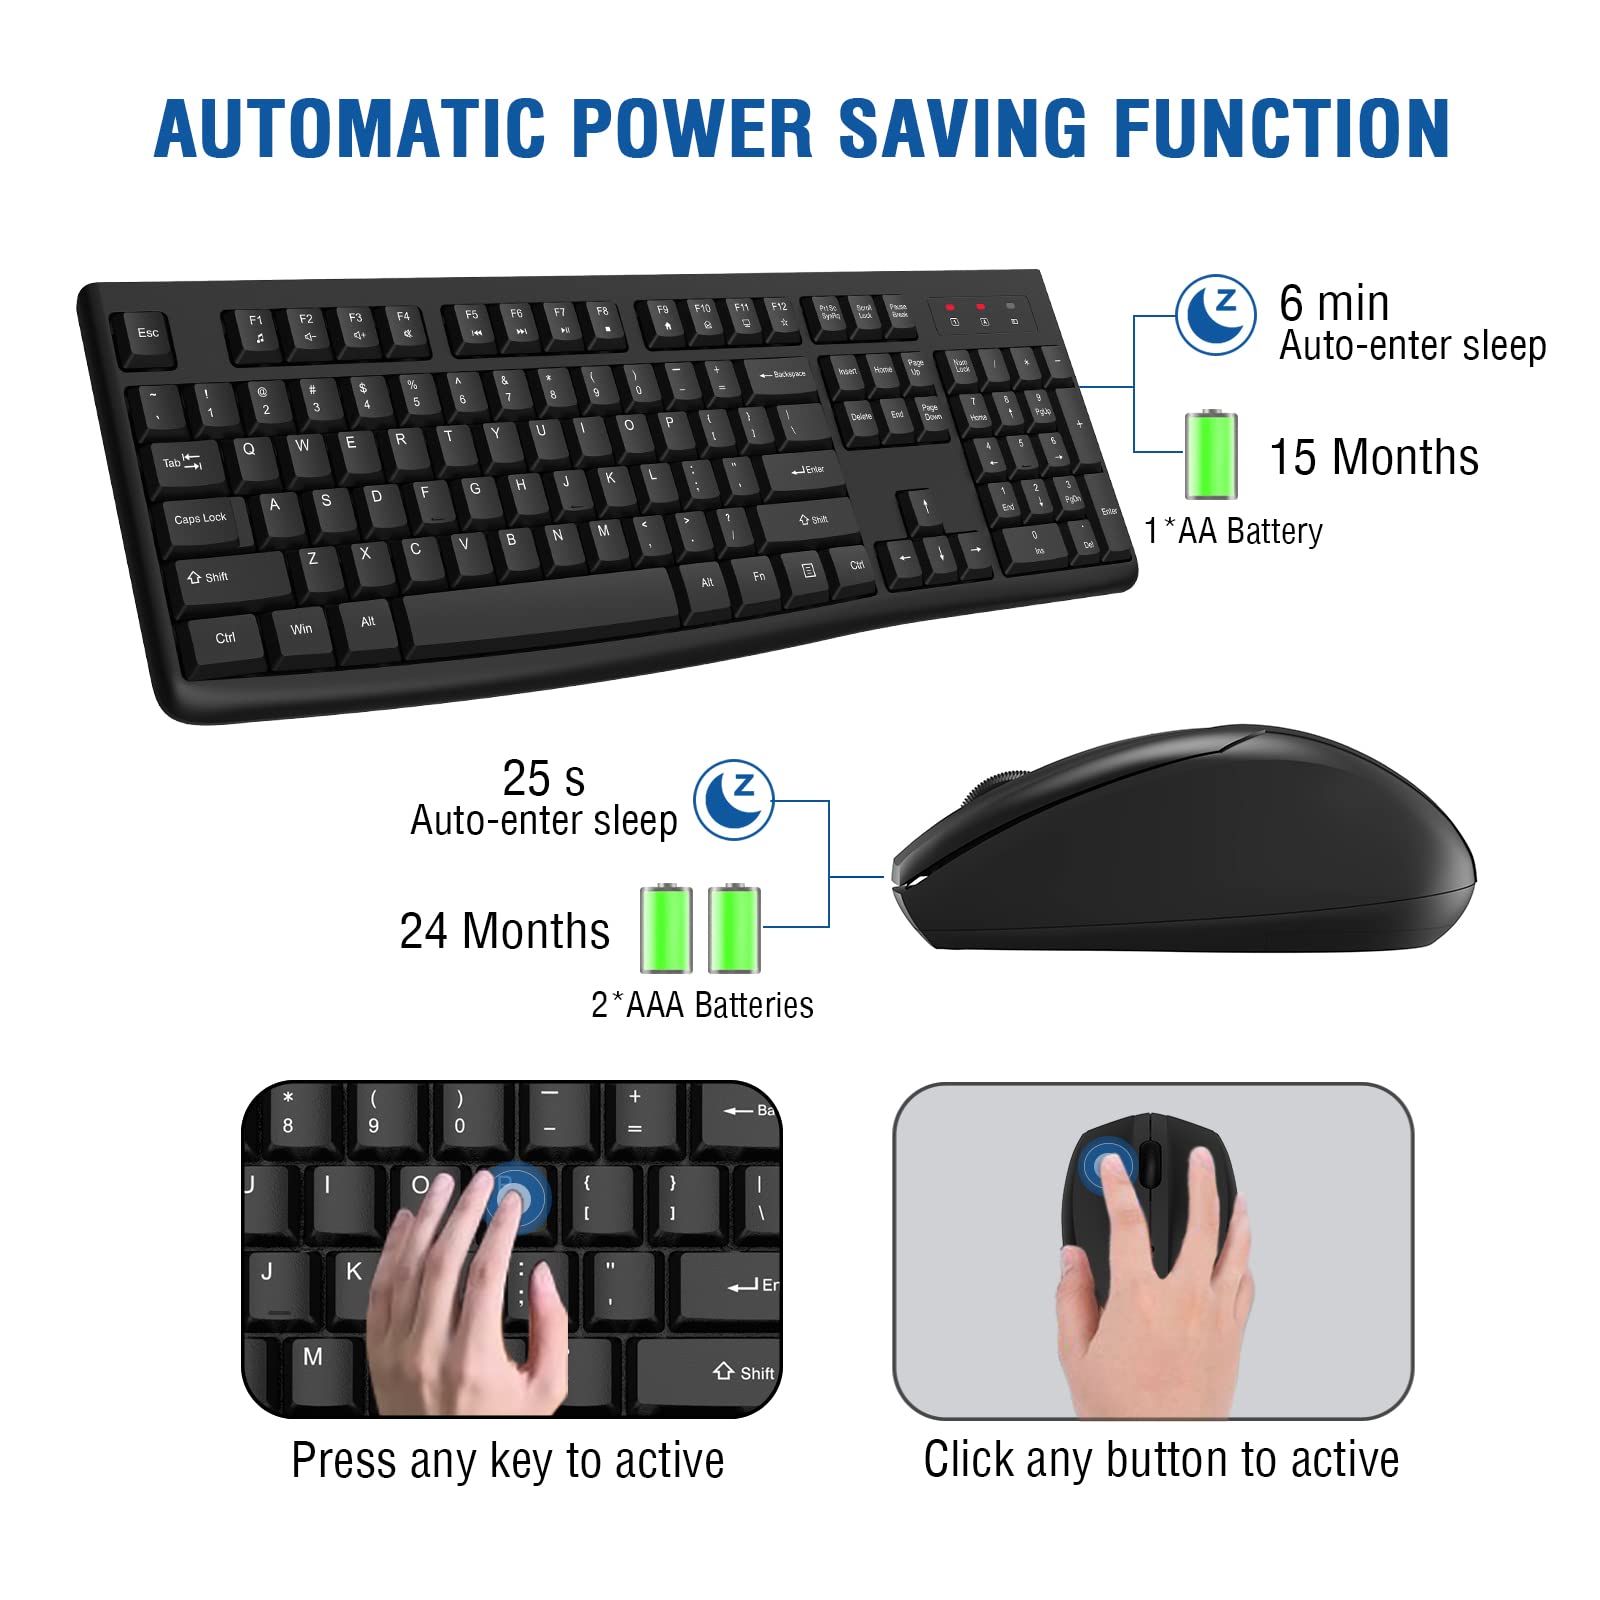 Wireless Keyboard and Mouse Combo, EDJO Full-Sized 2.4GHz USB Computer Wireless Keyboard and Wireless Optical Mouse for Windows, Mac, Laptop/Desktop/PC